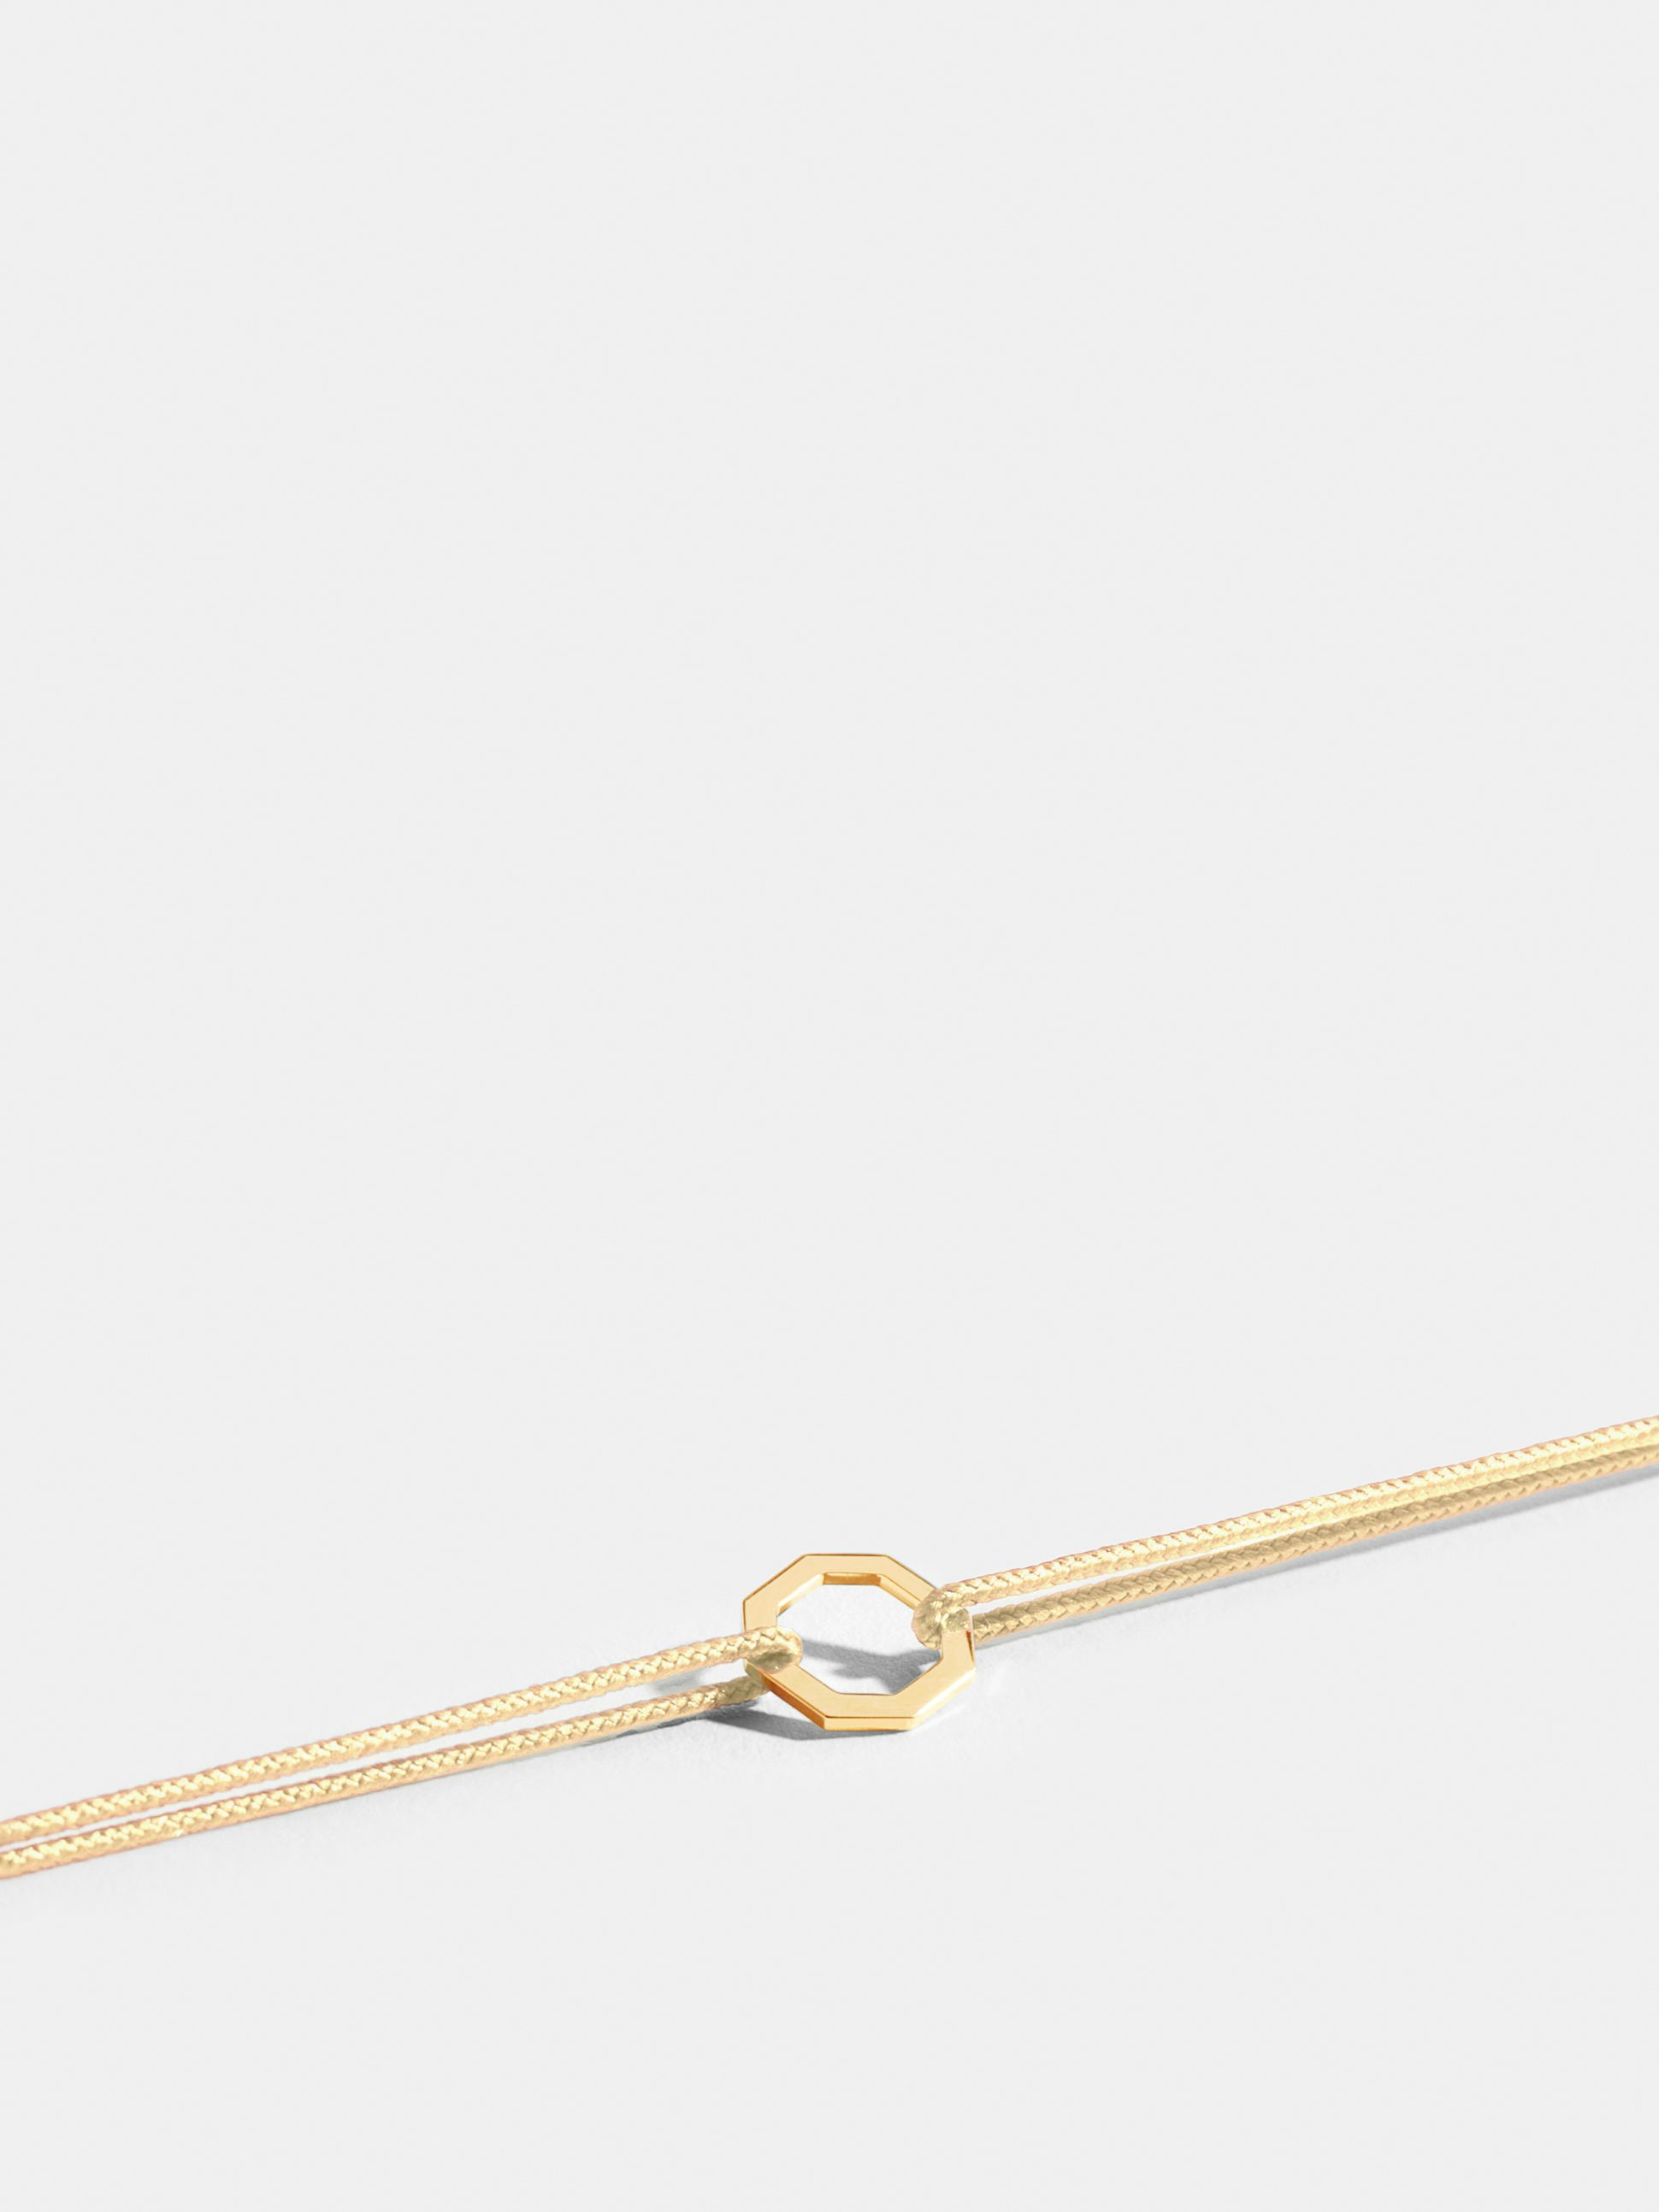 Octogone motif in 18k Fairmined ethical yellow gold, on an ivory white cord. 